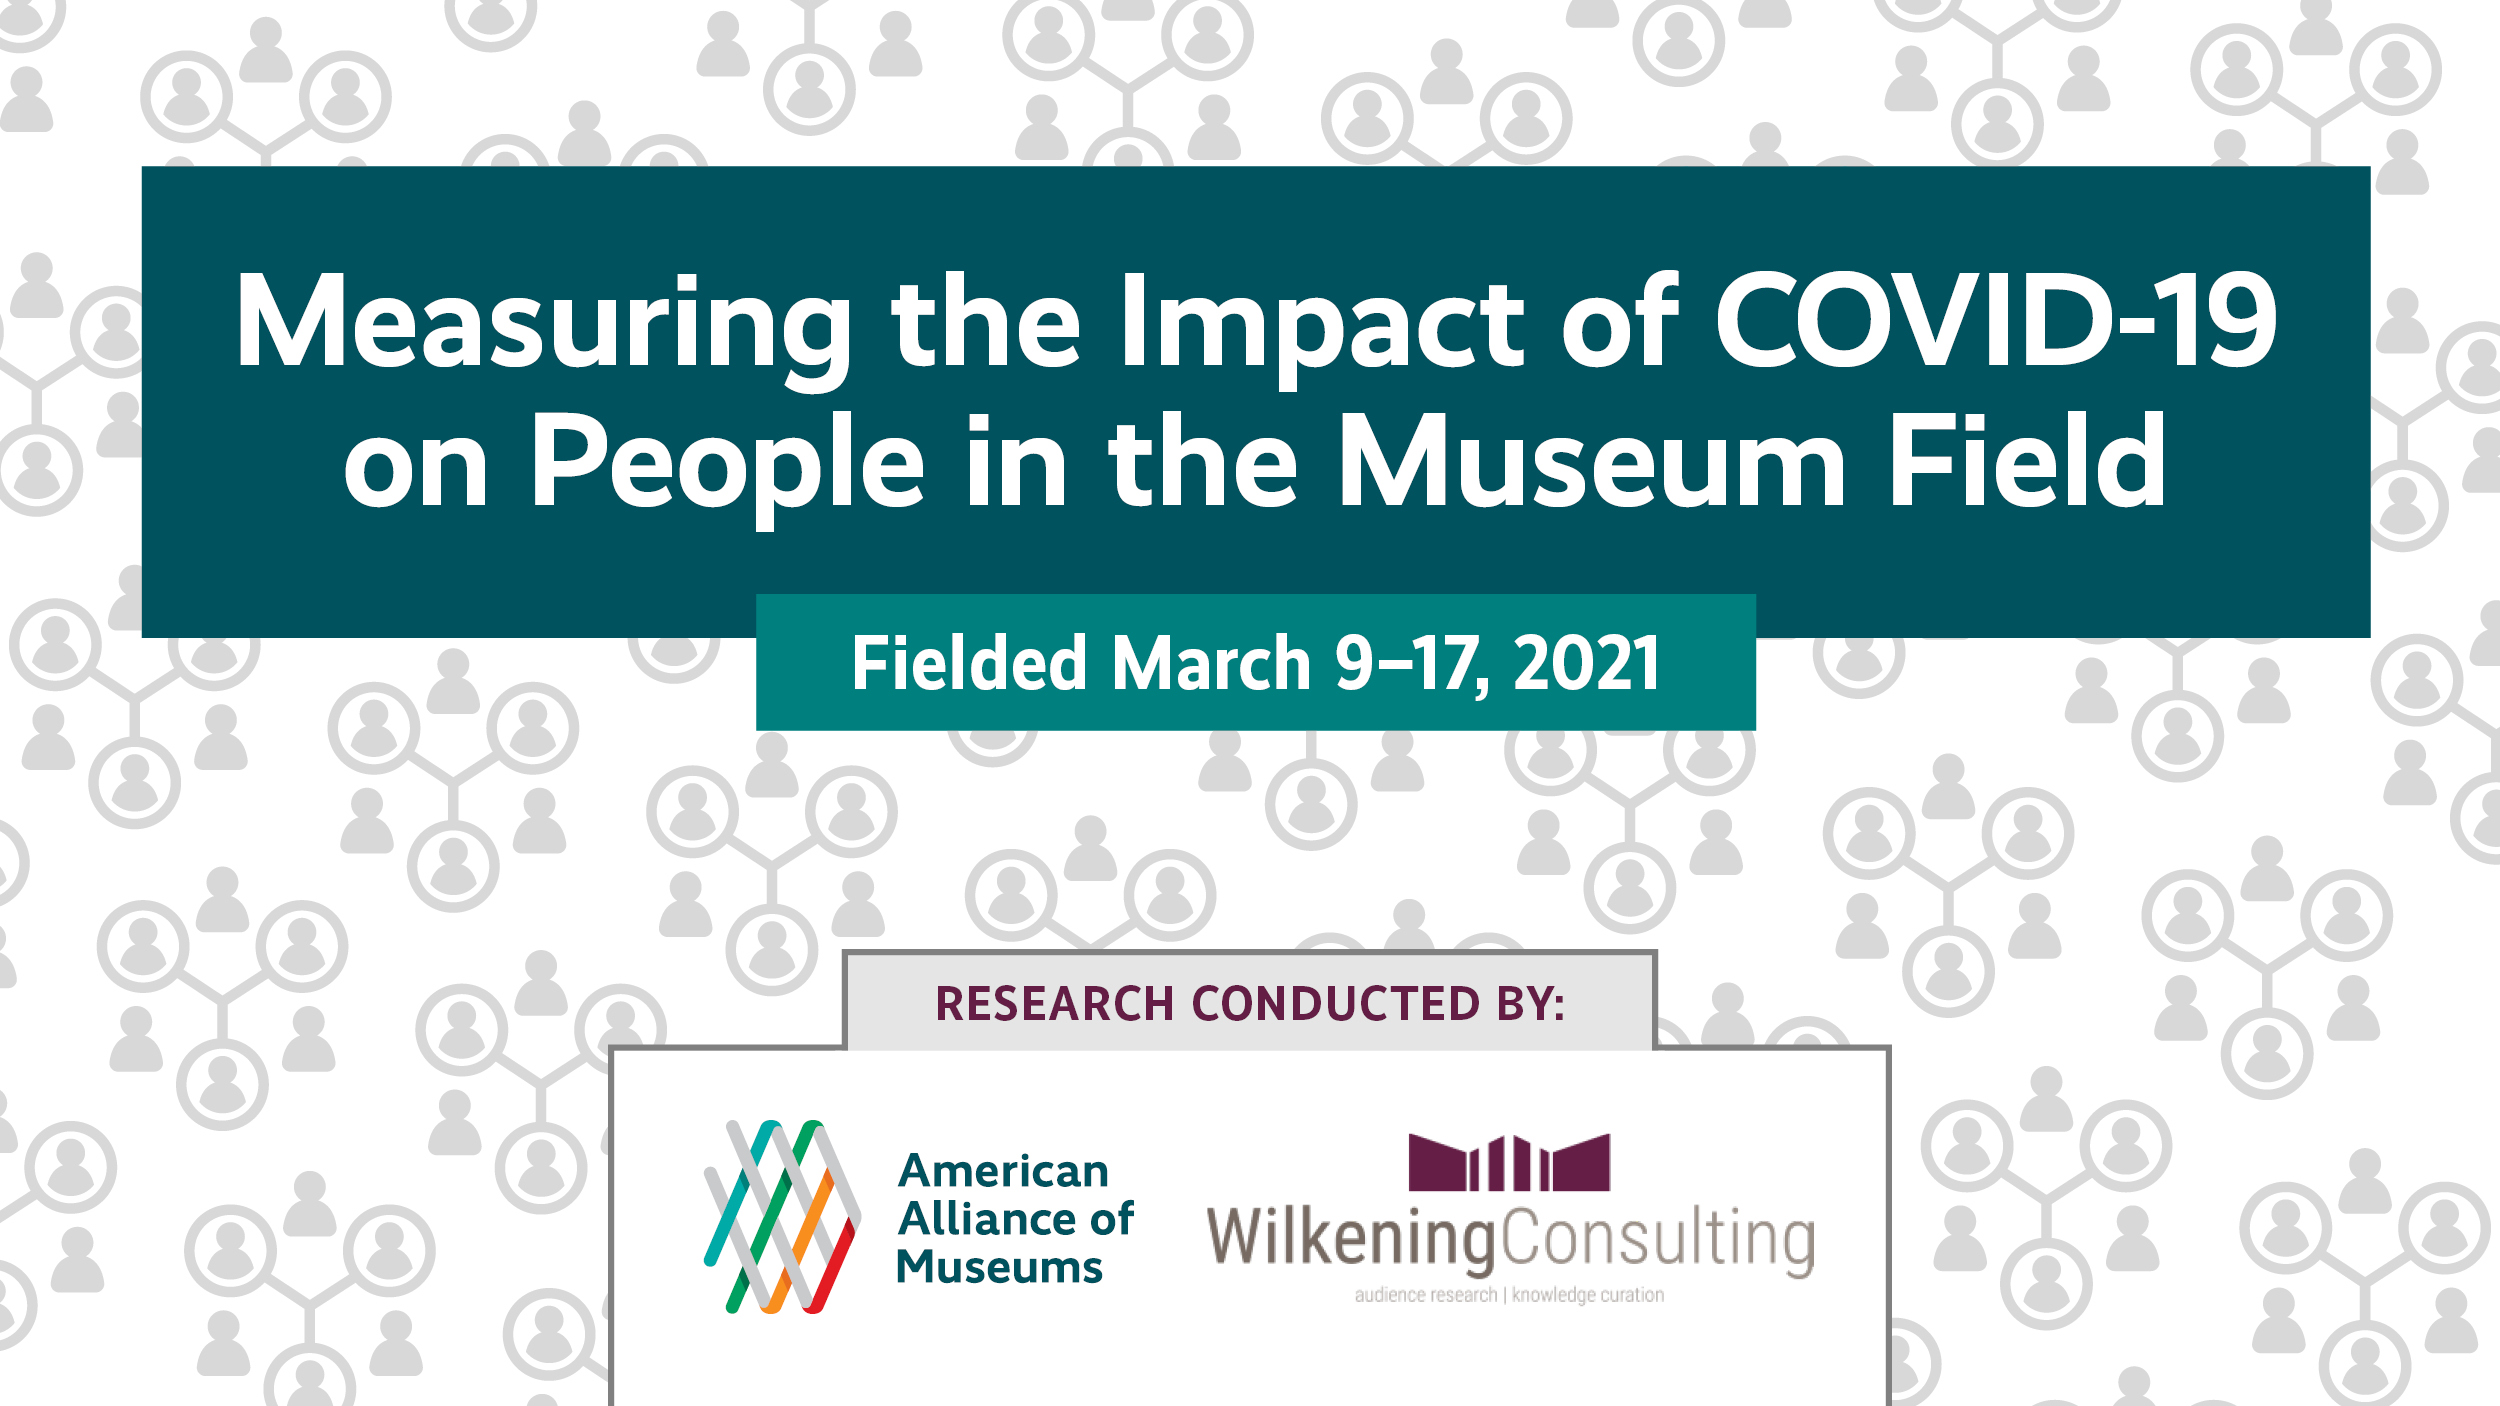 people pattern background with text overlay that says Measurign the Impact of COVID-19 on people in the Museum Field fielded March 9-17, 2021 research conducted by AAM and Wilkening consulting